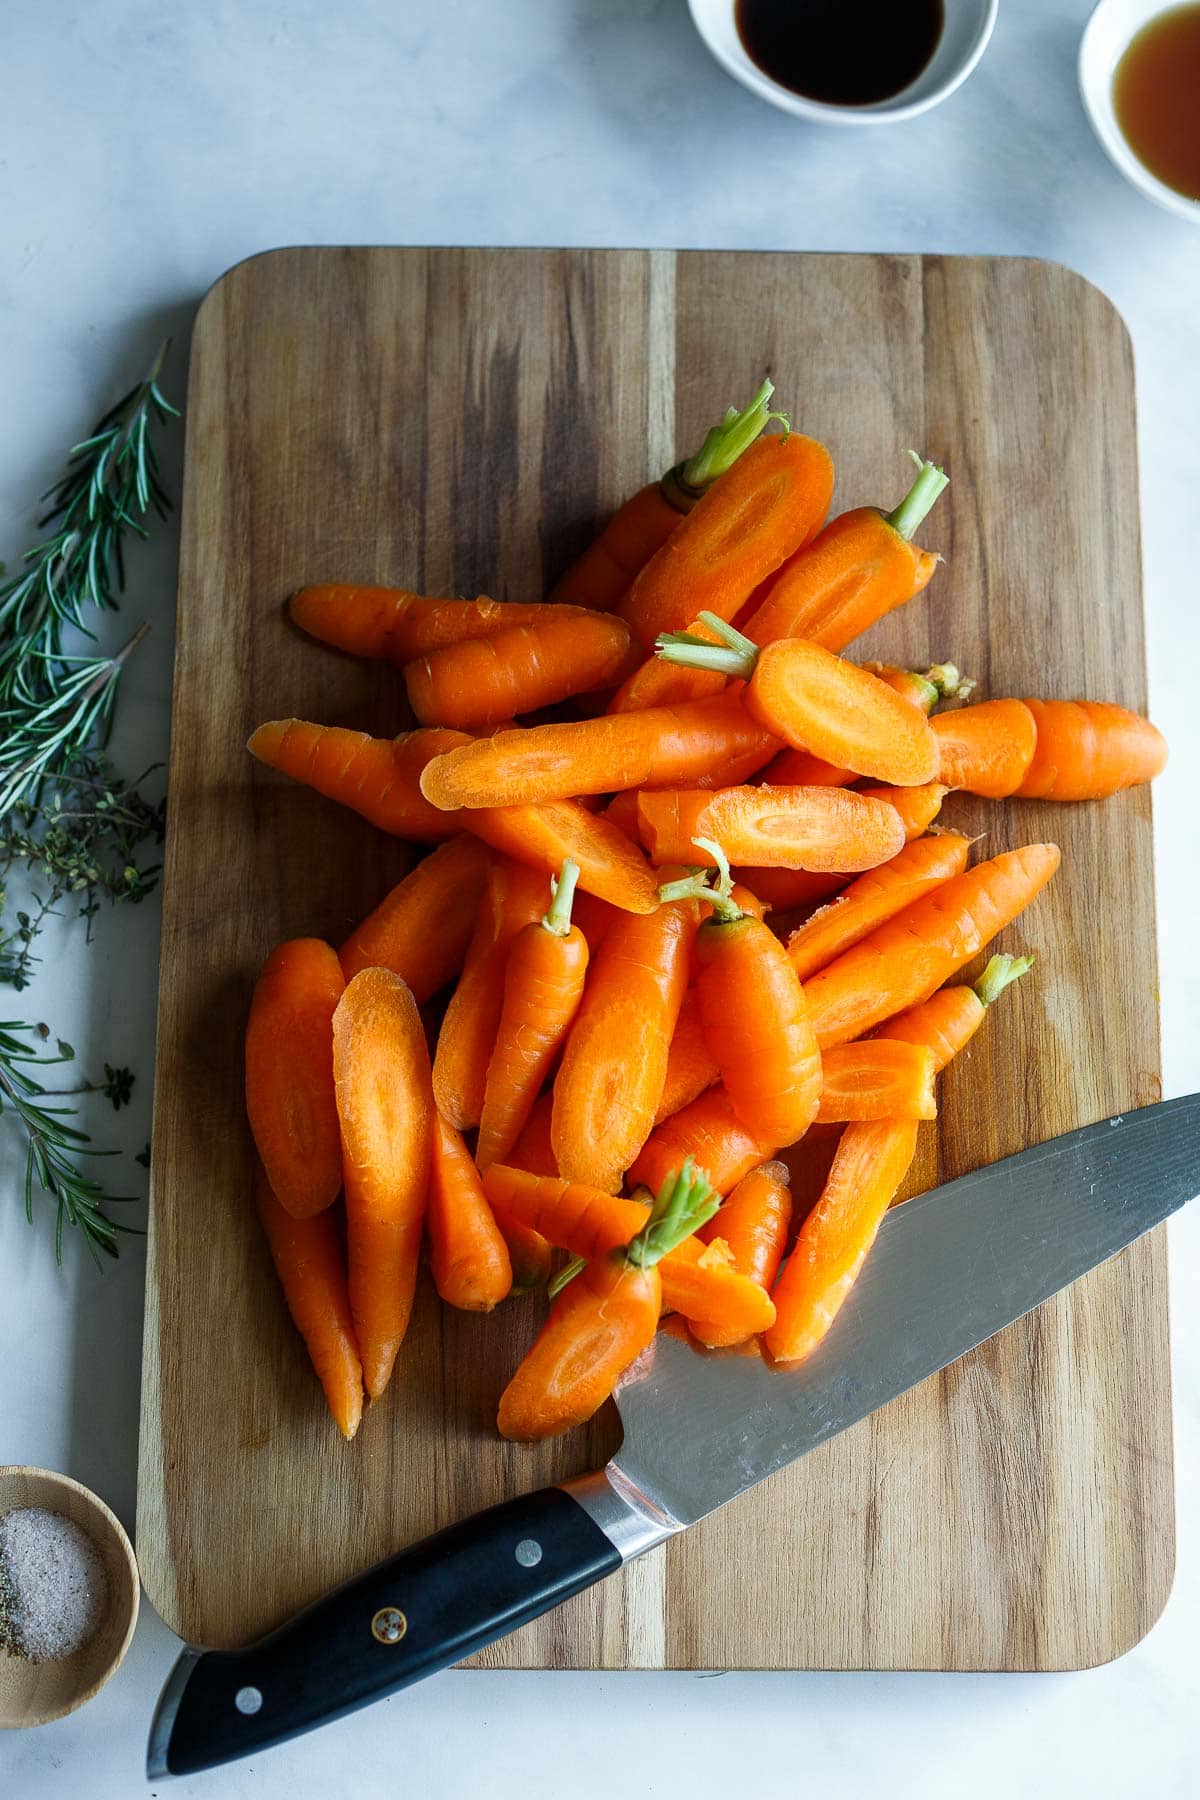 Sliced carrots on a cutting board for glazed carrots.